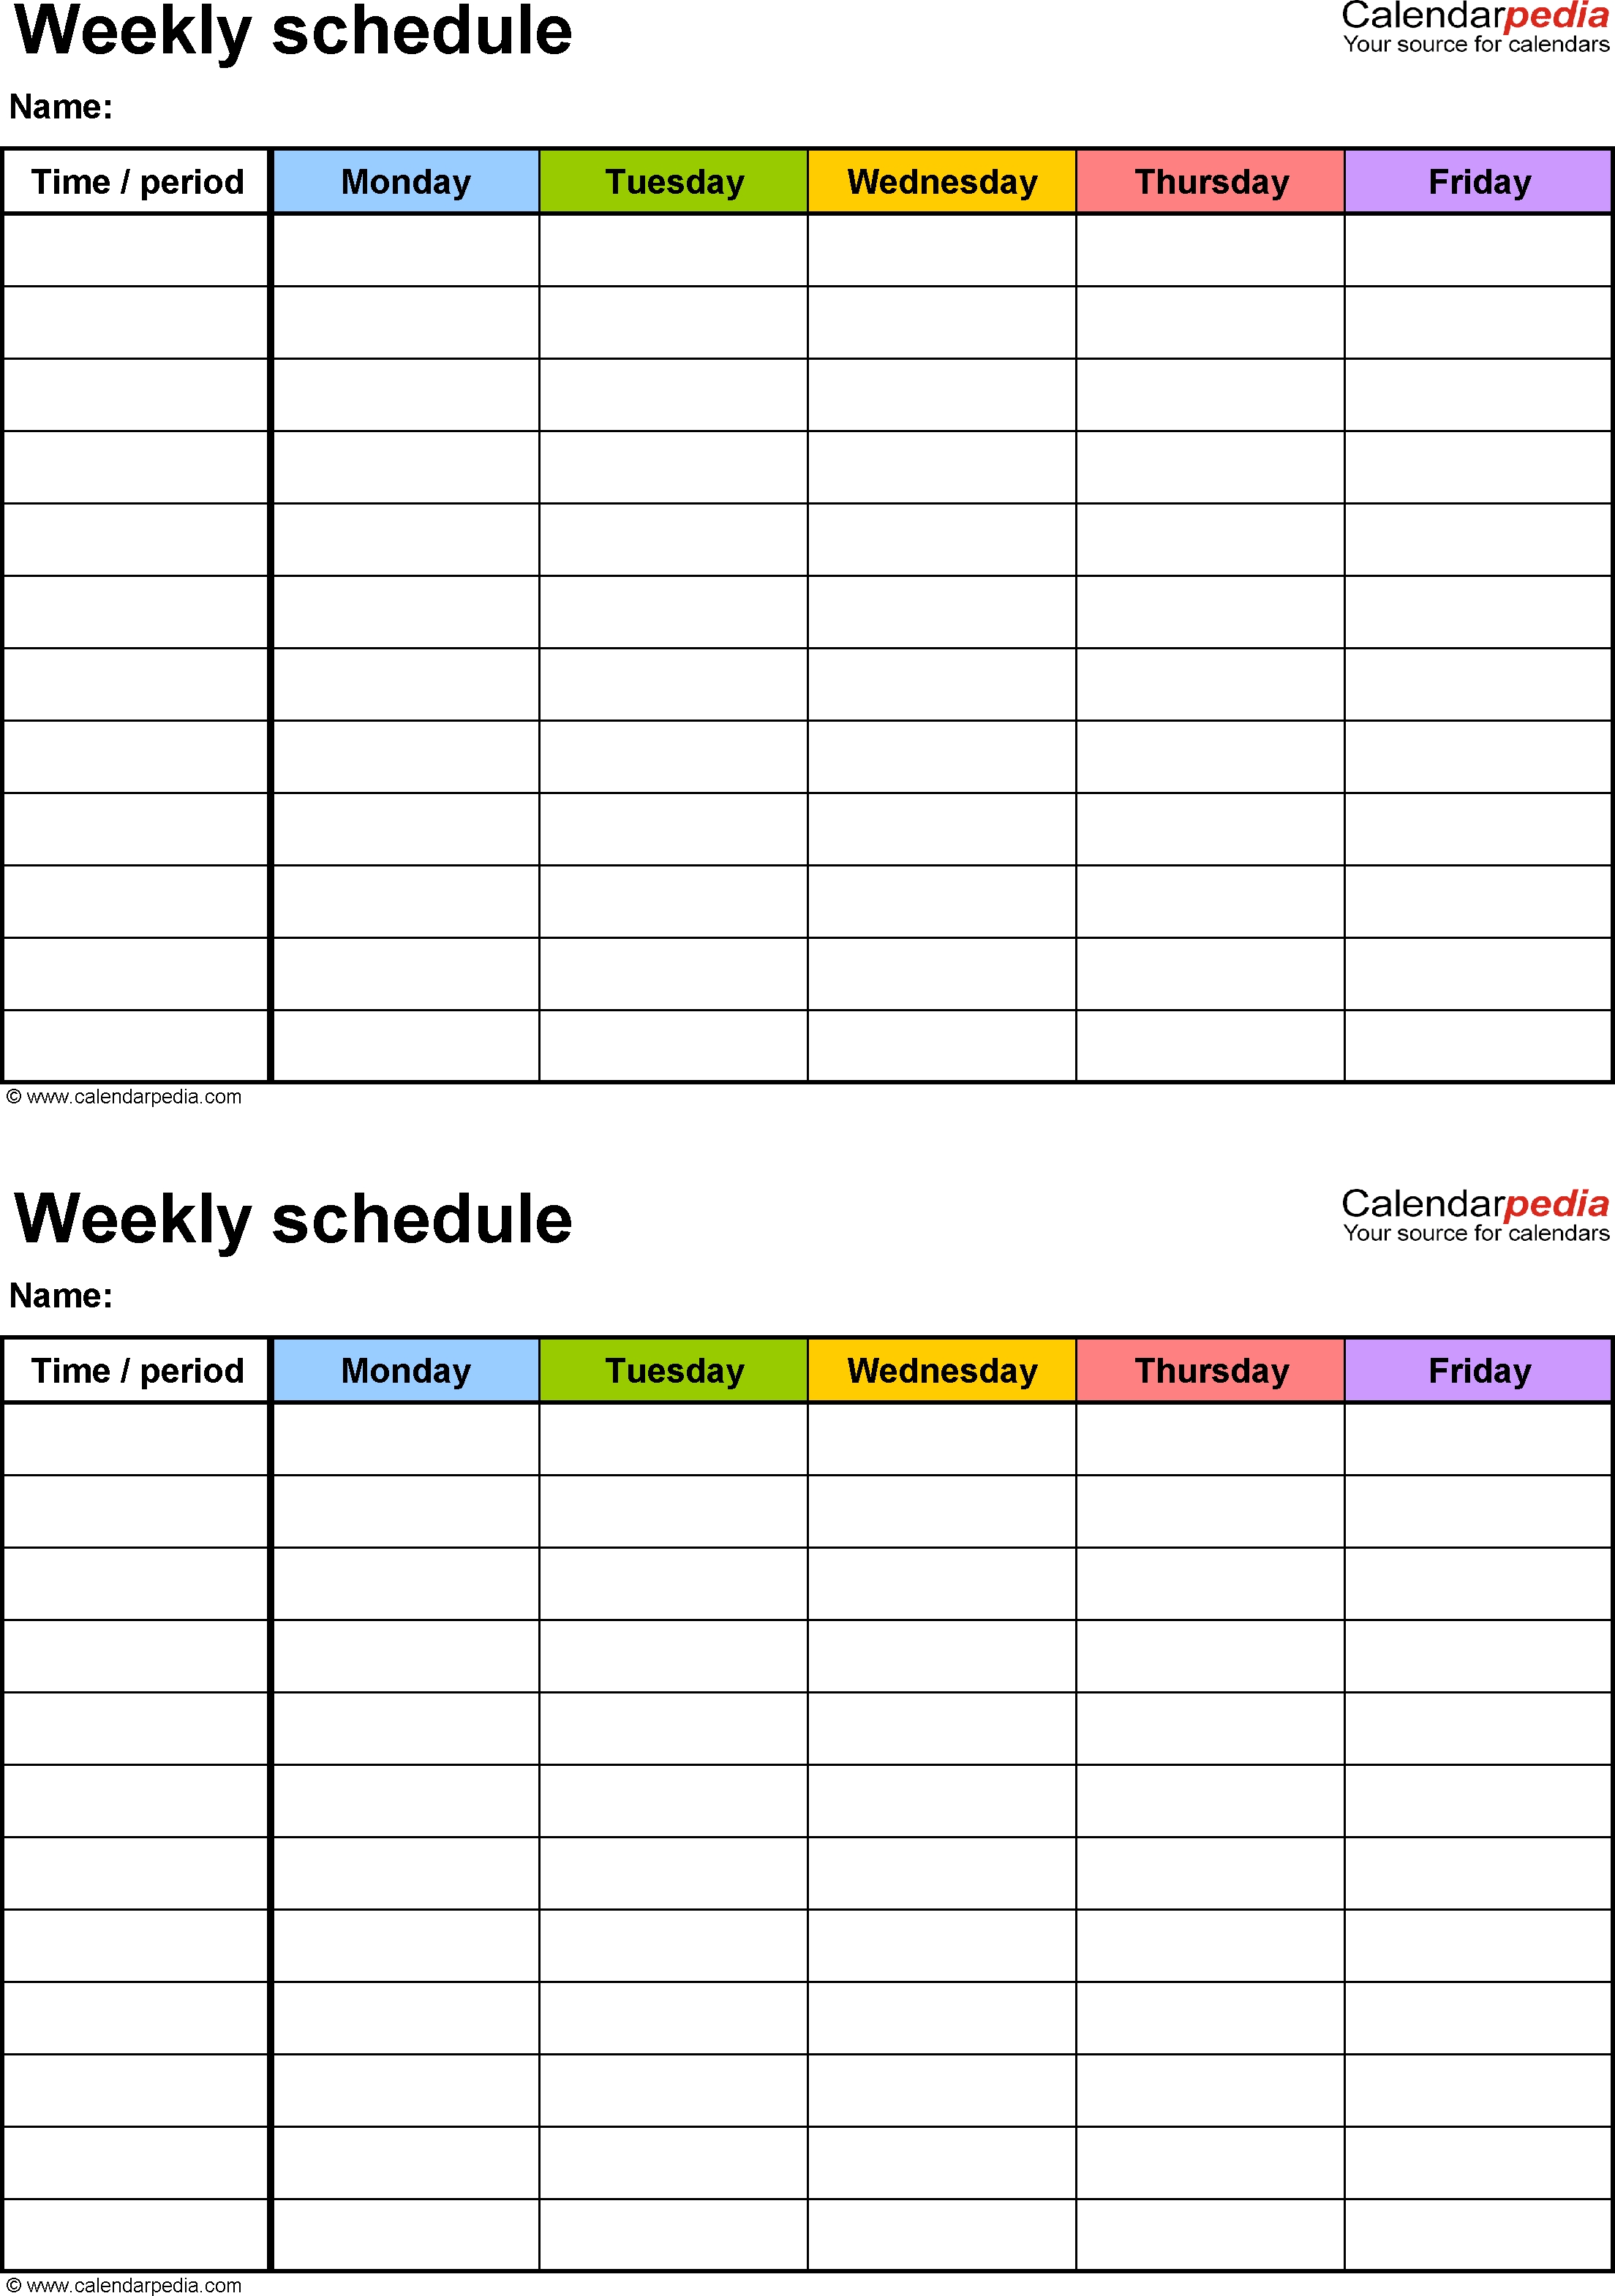 Free Weekly Schedule Templates For Pdf - 18 Templates Free Calendar Schedule Template